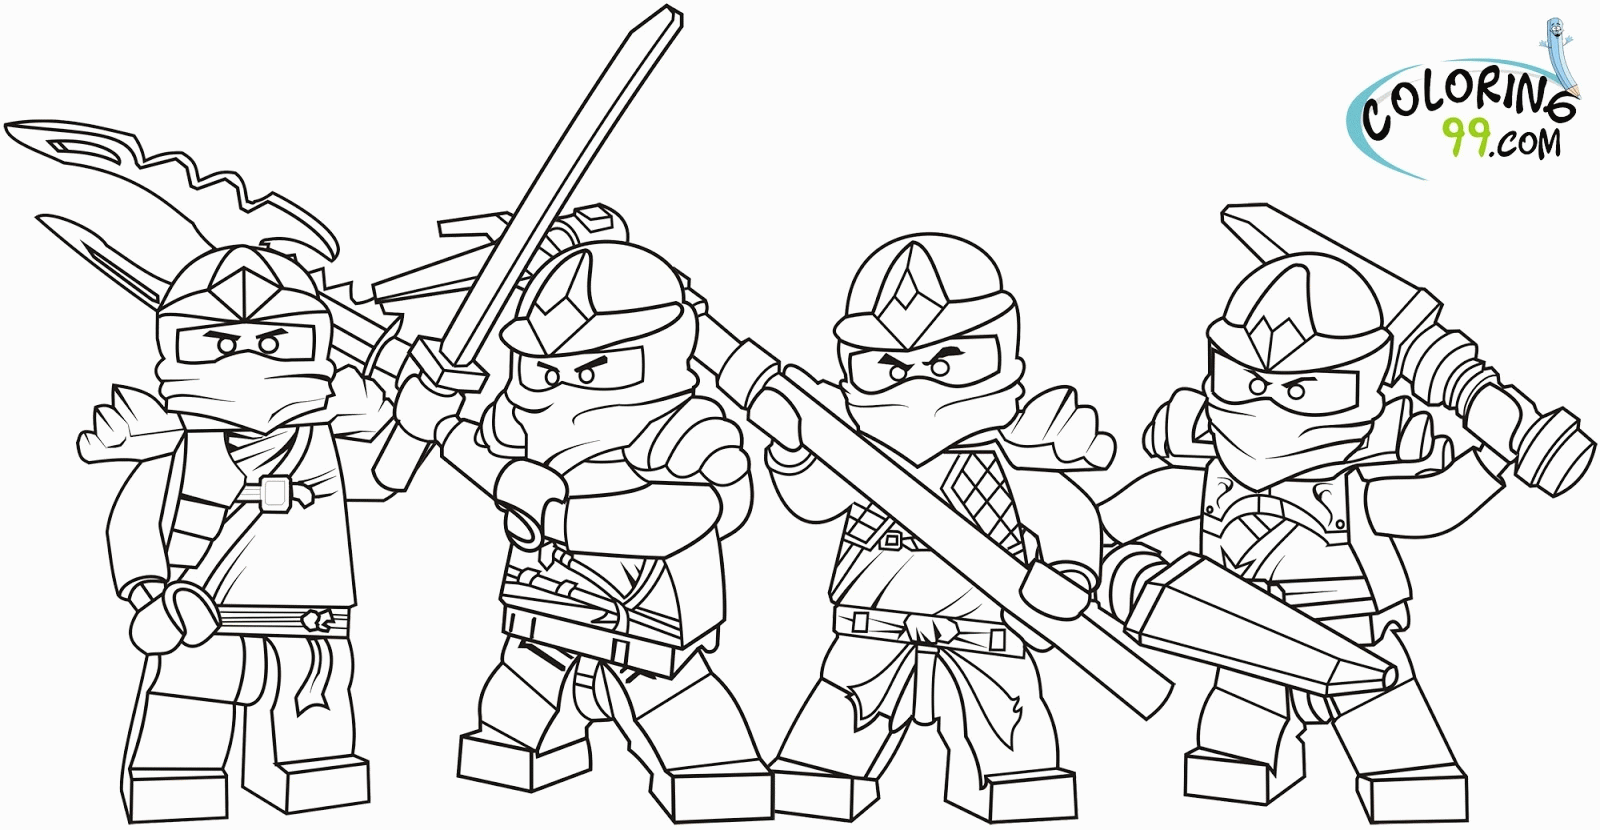 16 Free Pictures for: Lego City Coloring Pages. Temoon.us